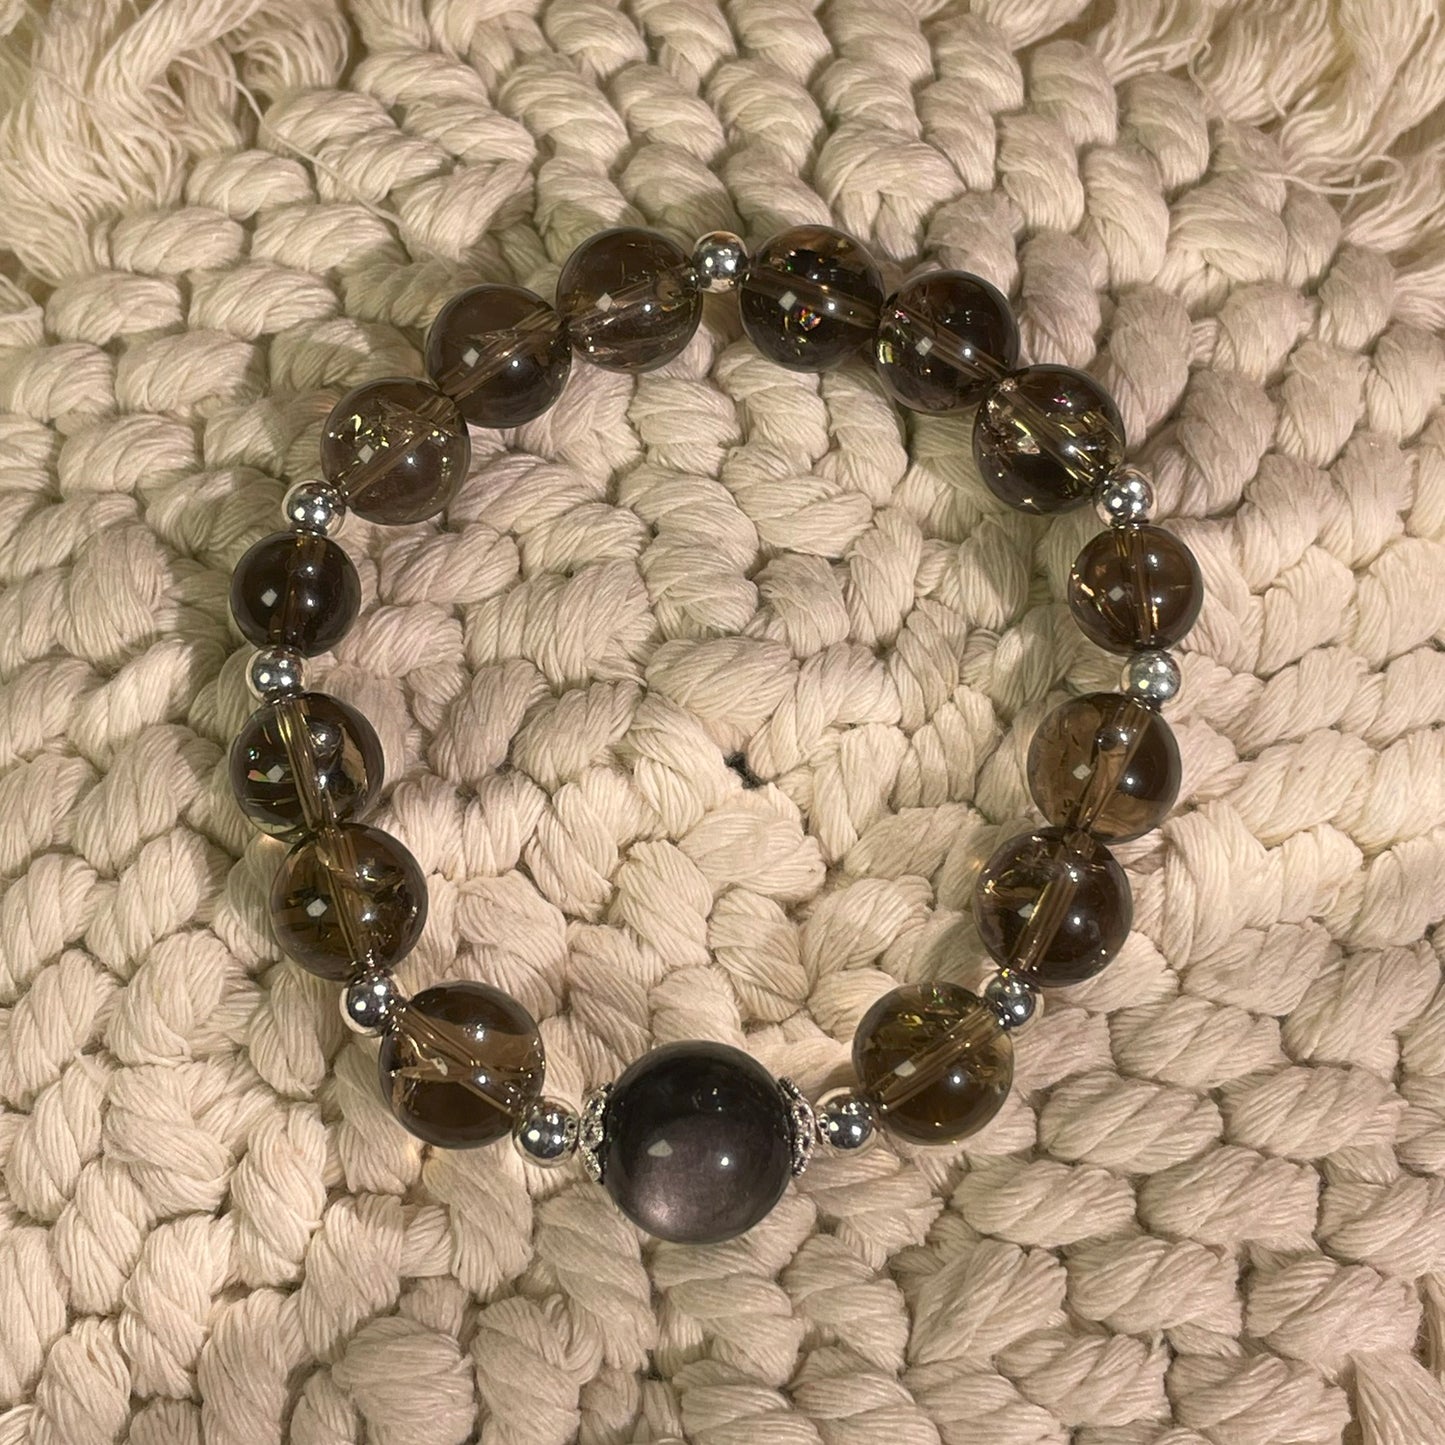 Natural high quality Smoky Quartz+Sliver Obsidian bracelet, with S925 silver accessories